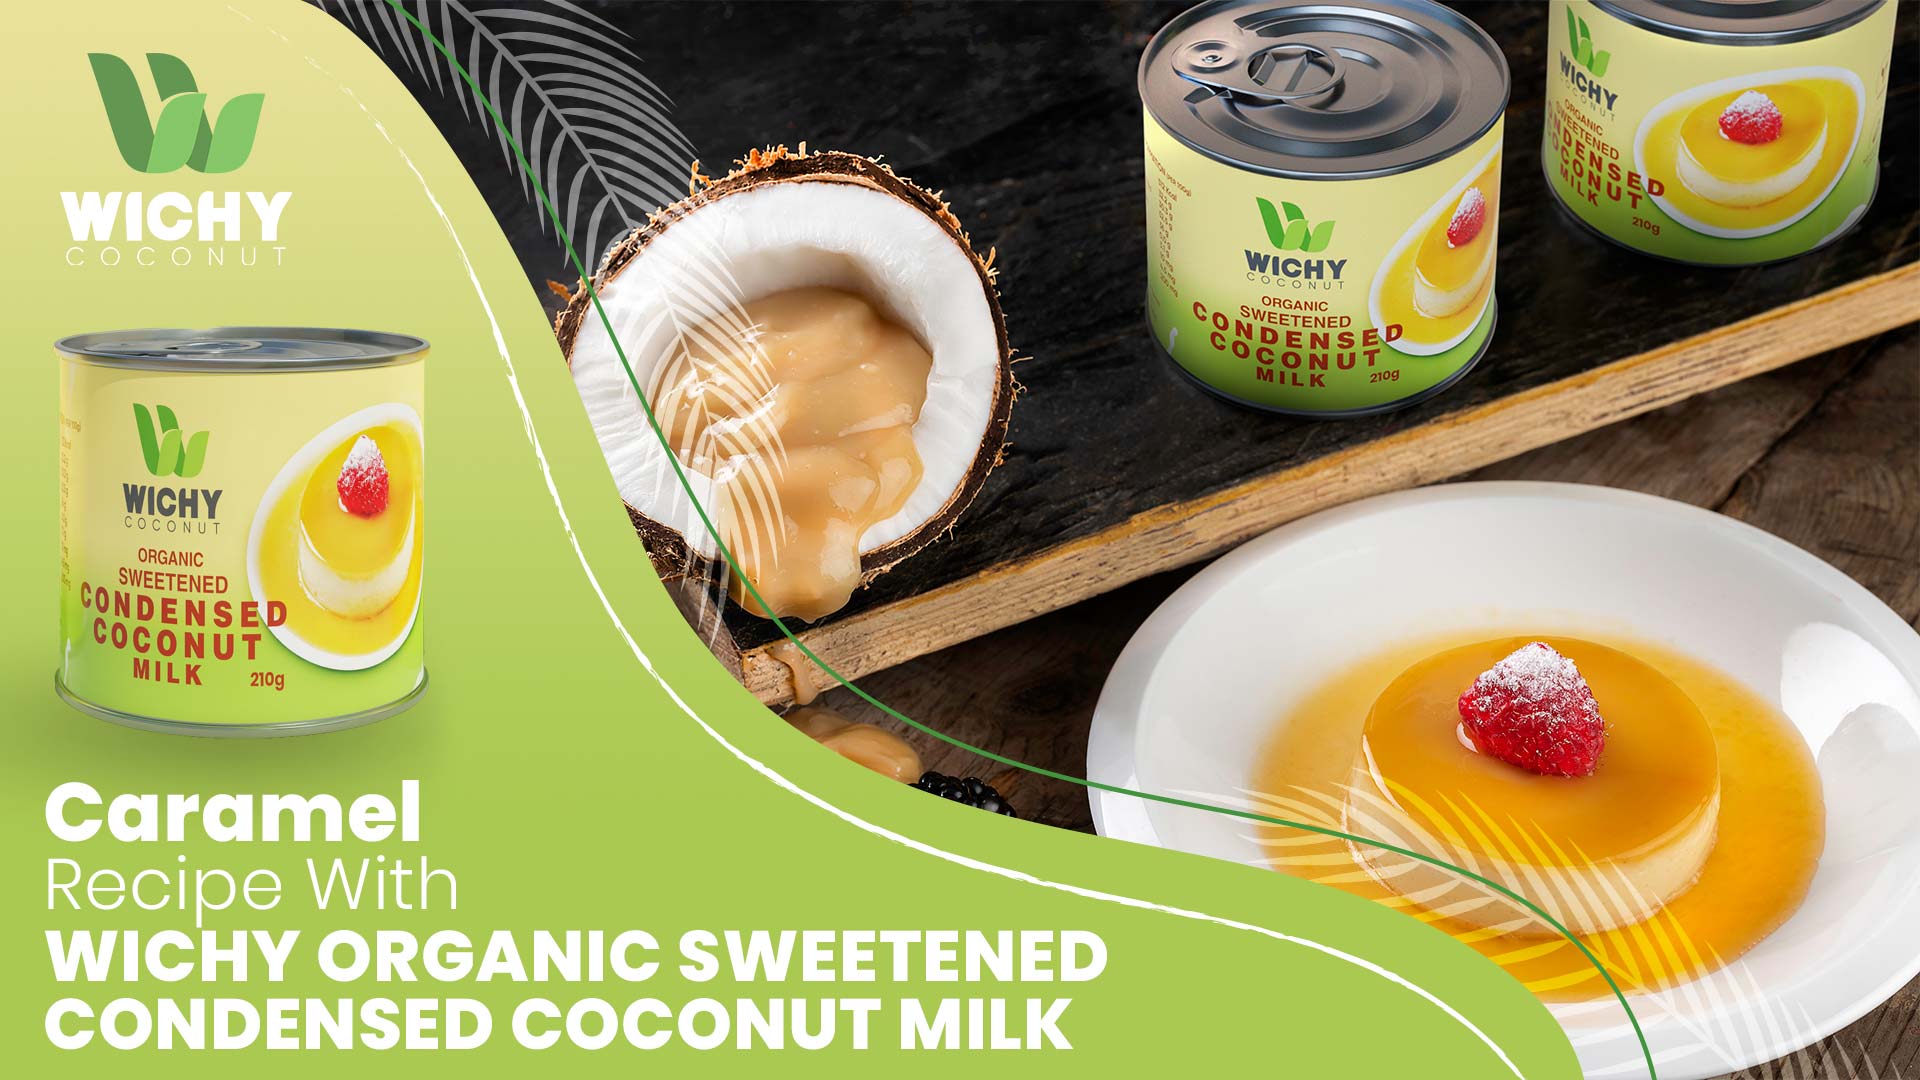 Caramel Recipe with WICHY Organic Sweetened Condensed Coconut Milk